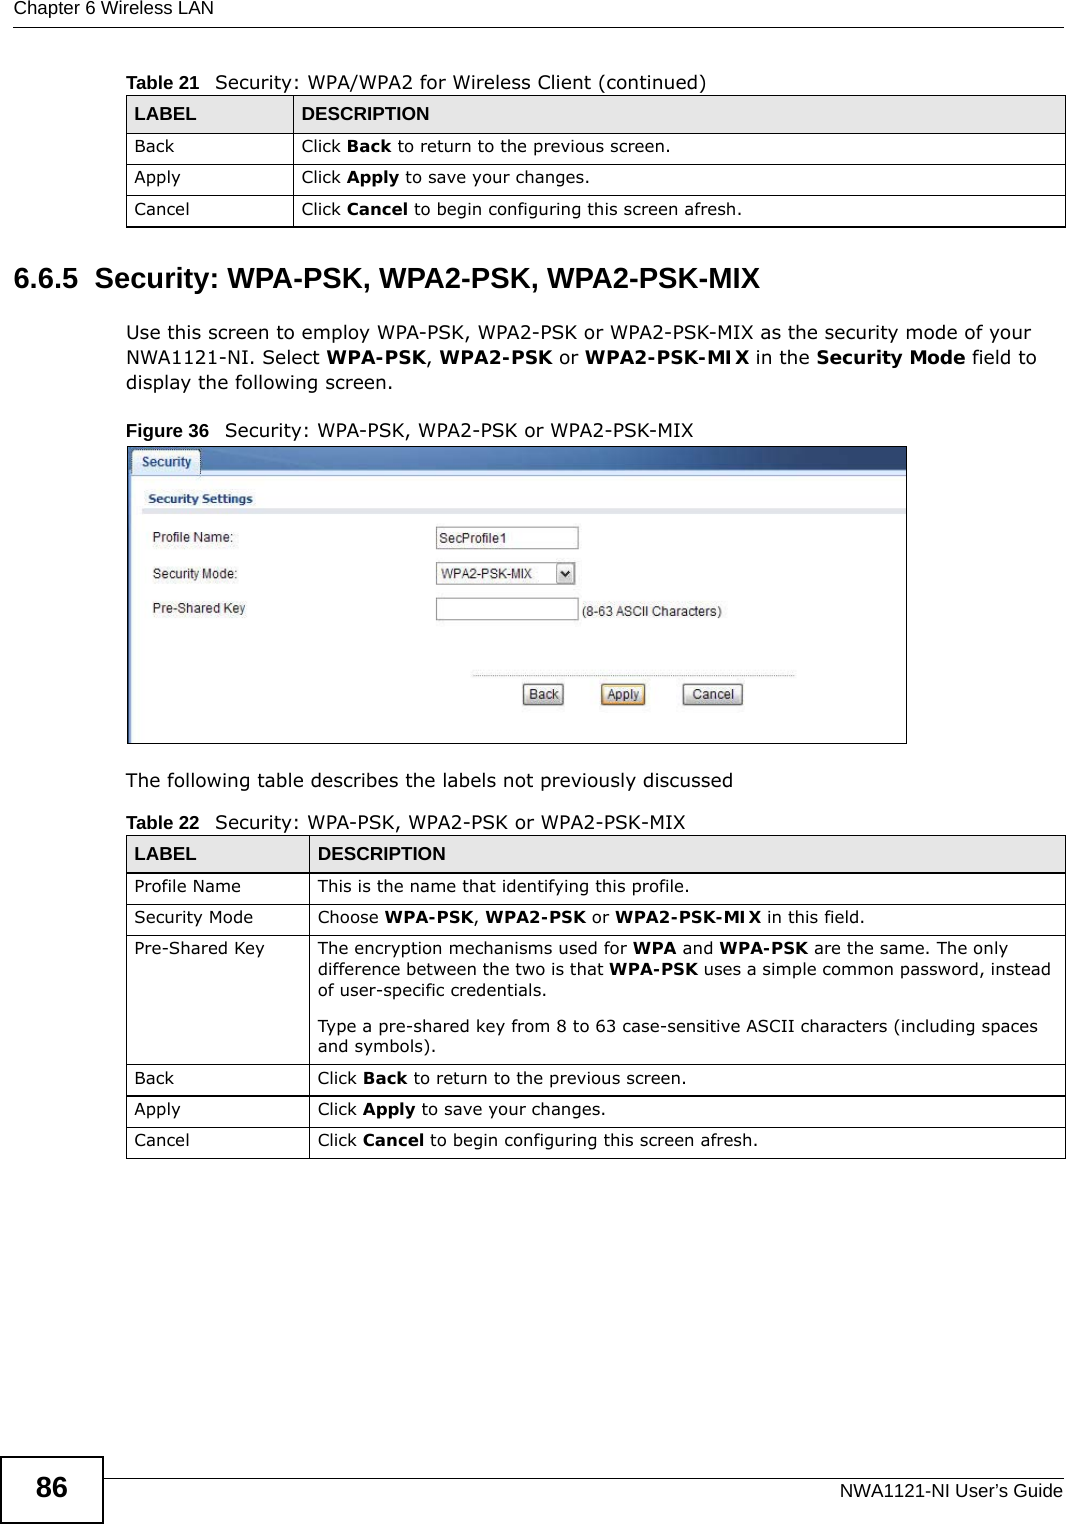 Chapter 6 Wireless LANNWA1121-NI User’s Guide866.6.5  Security: WPA-PSK, WPA2-PSK, WPA2-PSK-MIXUse this screen to employ WPA-PSK, WPA2-PSK or WPA2-PSK-MIX as the security mode of your NWA1121-NI. Select WPA-PSK, WPA2-PSK or WPA2-PSK-MIX in the Security Mode field to display the following screen.Figure 36   Security: WPA-PSK, WPA2-PSK or WPA2-PSK-MIXThe following table describes the labels not previously discussedBack Click Back to return to the previous screen.Apply Click Apply to save your changes.Cancel Click Cancel to begin configuring this screen afresh.Table 21   Security: WPA/WPA2 for Wireless Client (continued)LABEL DESCRIPTIONTable 22   Security: WPA-PSK, WPA2-PSK or WPA2-PSK-MIXLABEL DESCRIPTIONProfile Name This is the name that identifying this profile.Security Mode Choose WPA-PSK, WPA2-PSK or WPA2-PSK-MIX in this field.Pre-Shared Key The encryption mechanisms used for WPA and WPA-PSK are the same. The only difference between the two is that WPA-PSK uses a simple common password, instead of user-specific credentials.Type a pre-shared key from 8 to 63 case-sensitive ASCII characters (including spaces and symbols).Back Click Back to return to the previous screen.Apply Click Apply to save your changes.Cancel Click Cancel to begin configuring this screen afresh.